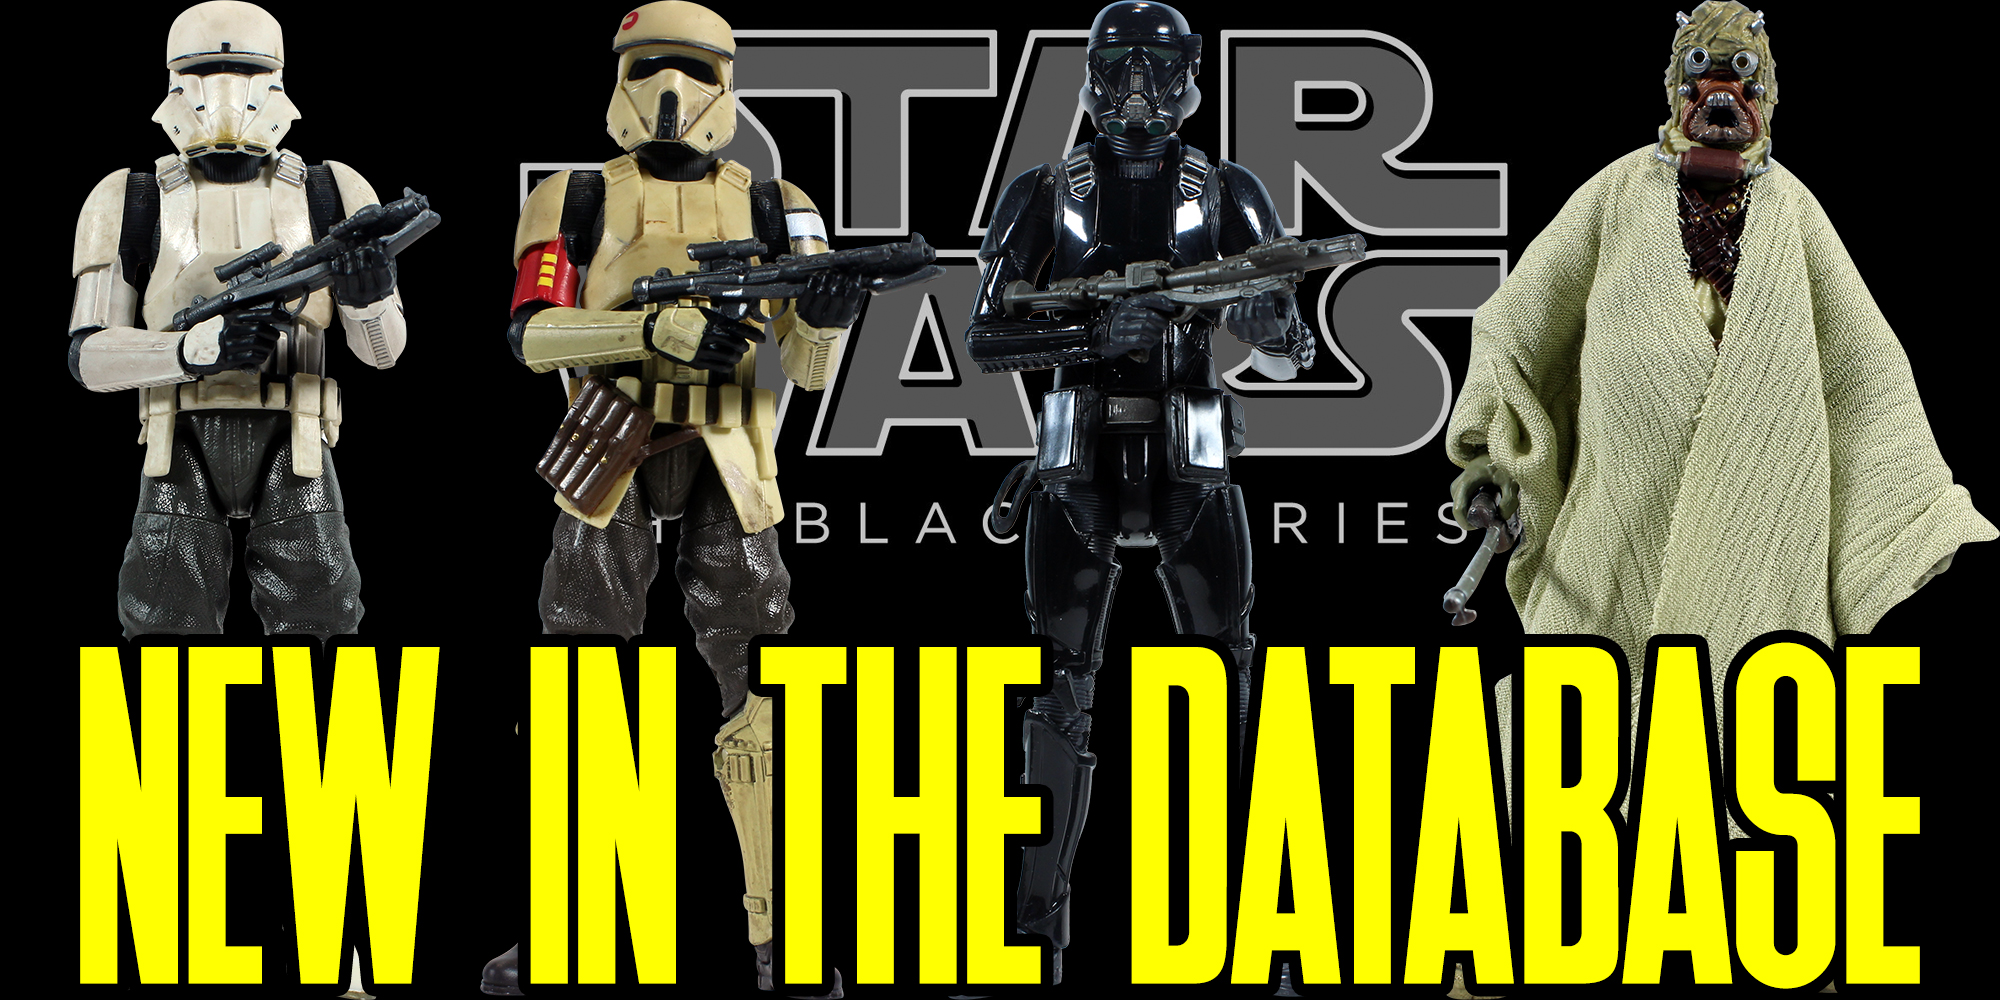 New Black Series Archive Figures Are Now In The Database